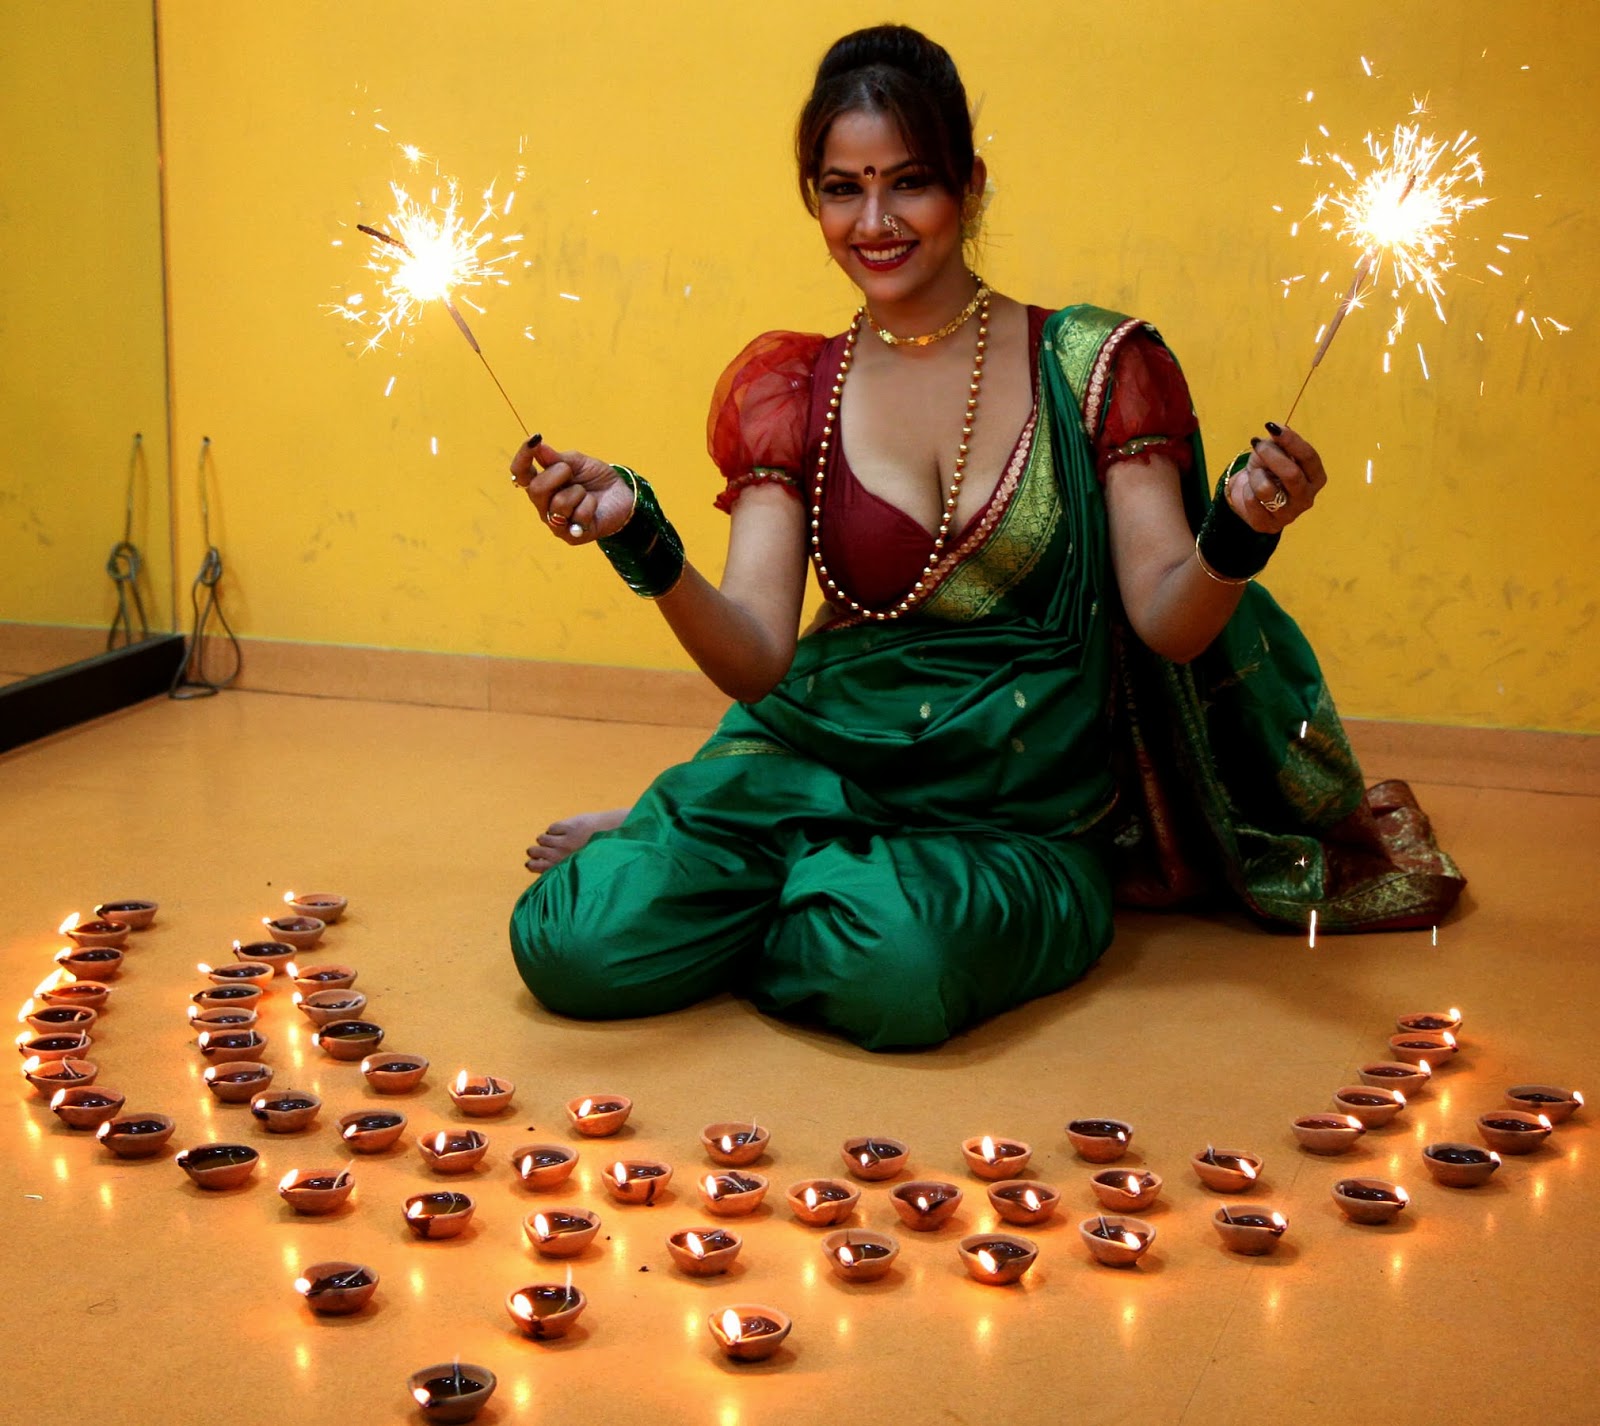 Orient Publication South Actress Tanisha Singh Did Diwali Photo Shoot In Indian Dress At